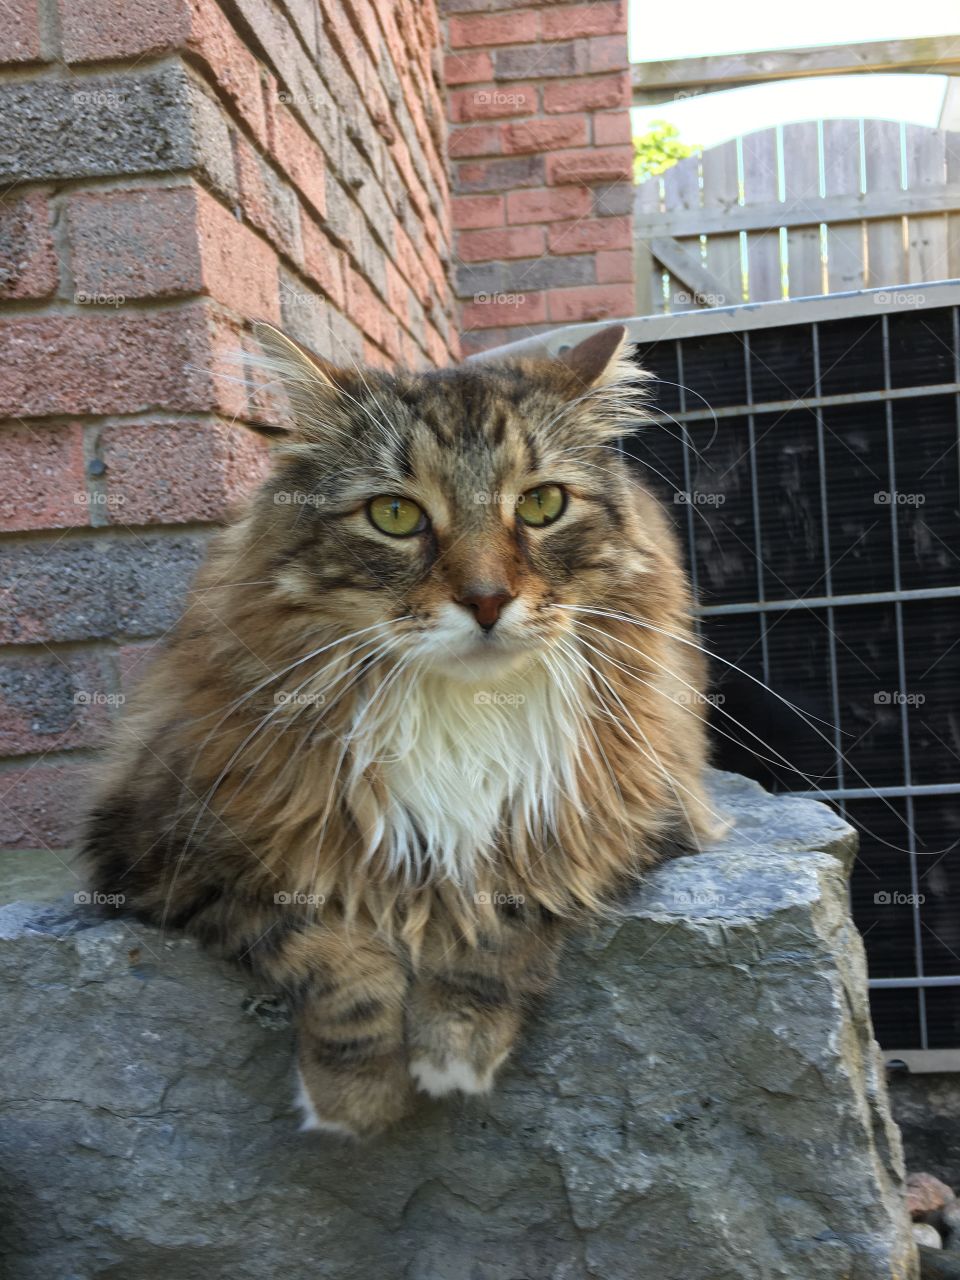 A large/fat maincoon cat. He is sitting outdoors on a large landscaping stone. Behind the cat is an air conditioning unit. Beautiful green eyes, and colourful markings along with long whiskers.